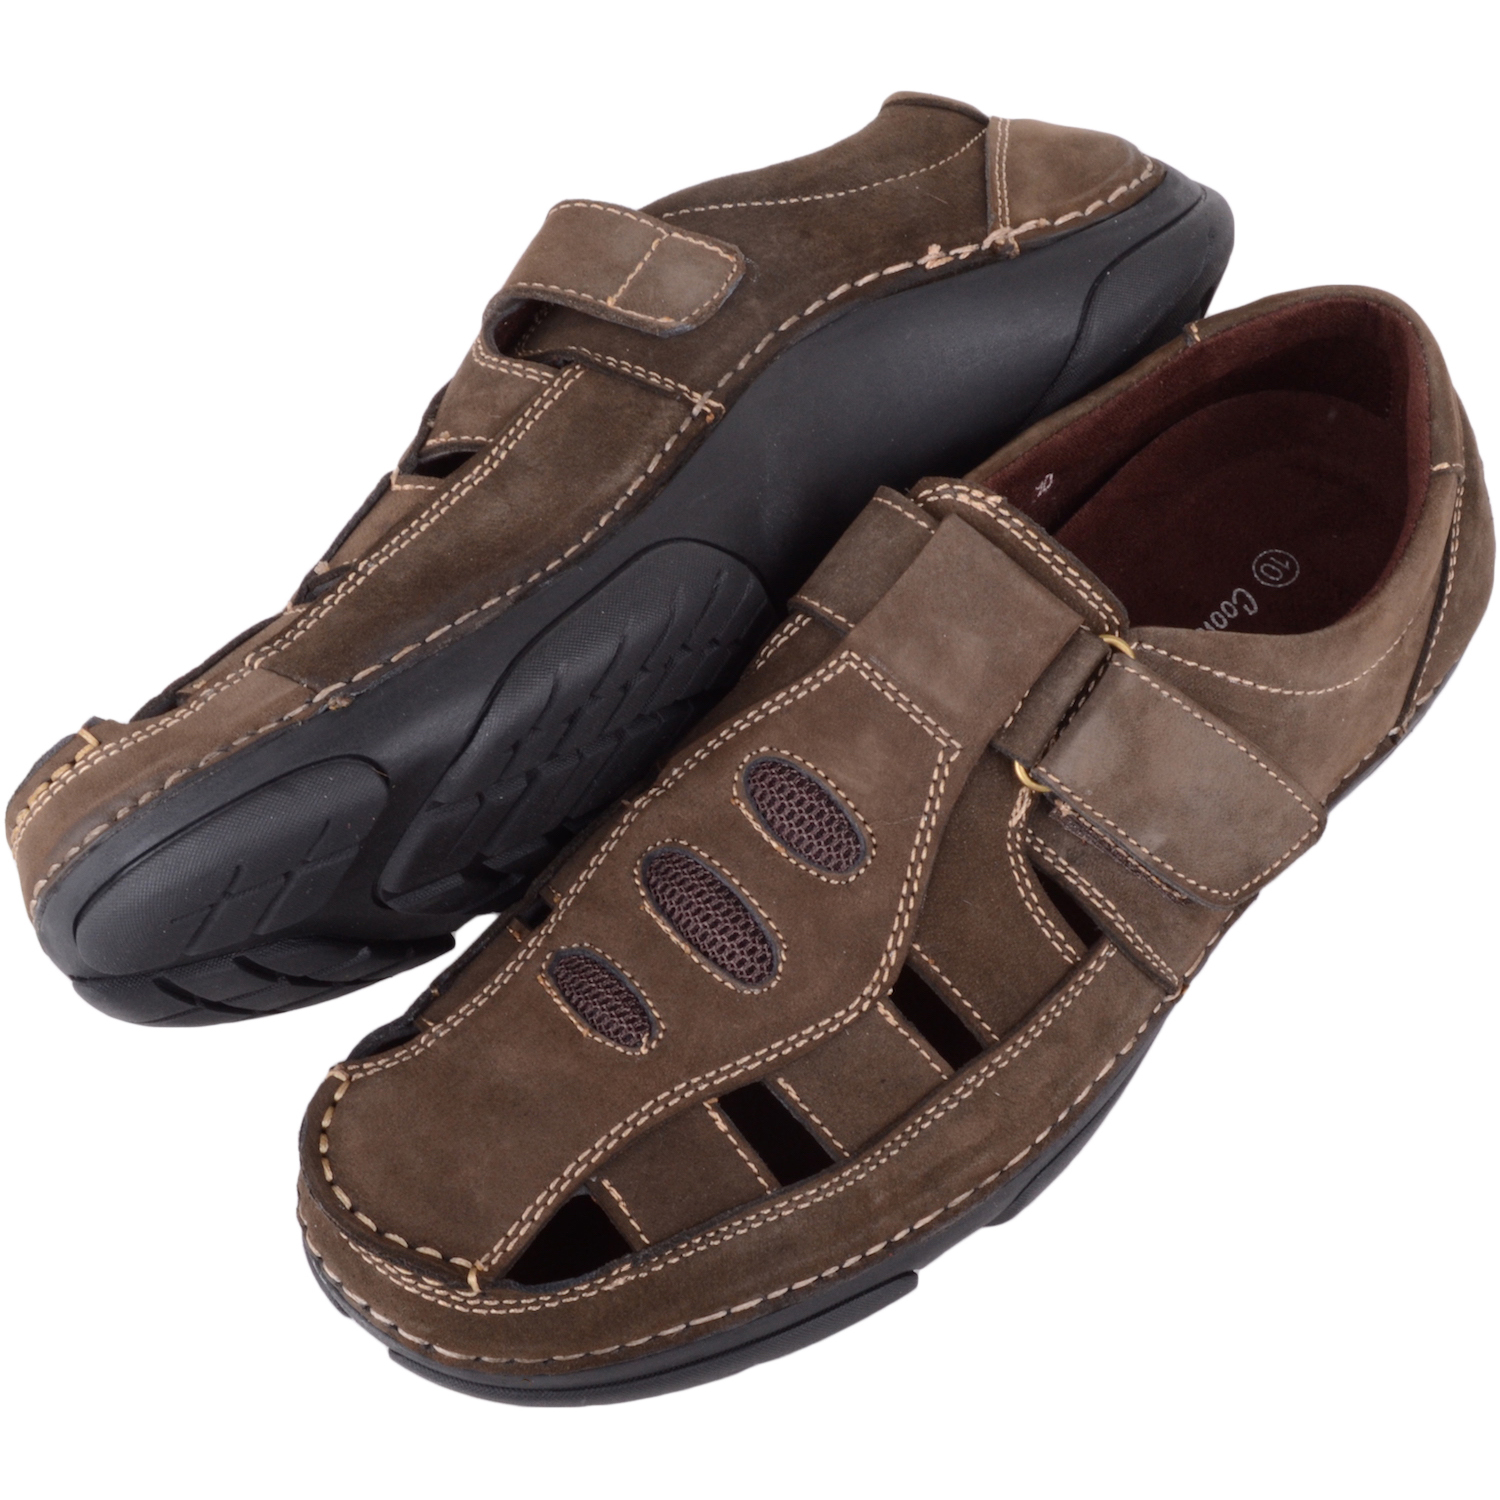 Casual Leather Summer Sandals – Brown – Snugrugs